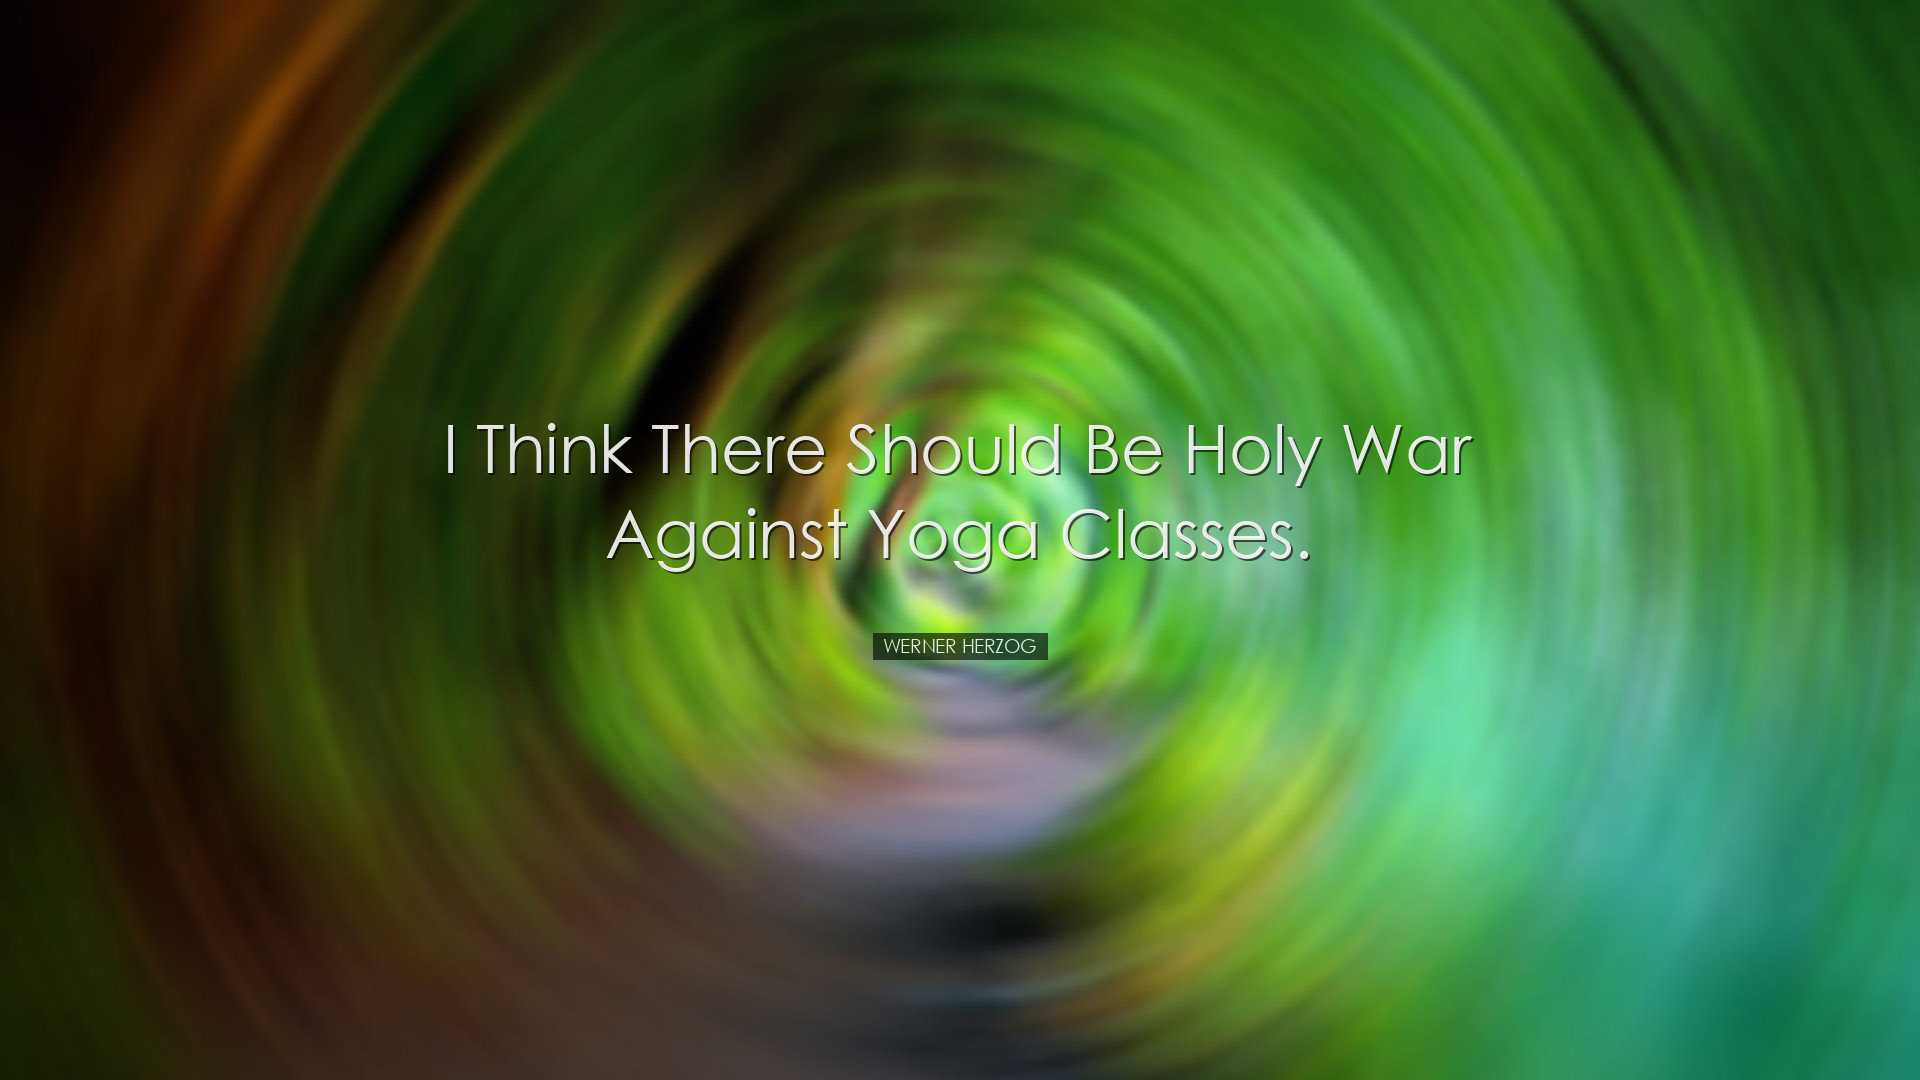 I think there should be holy war against yoga classes. - Werner He